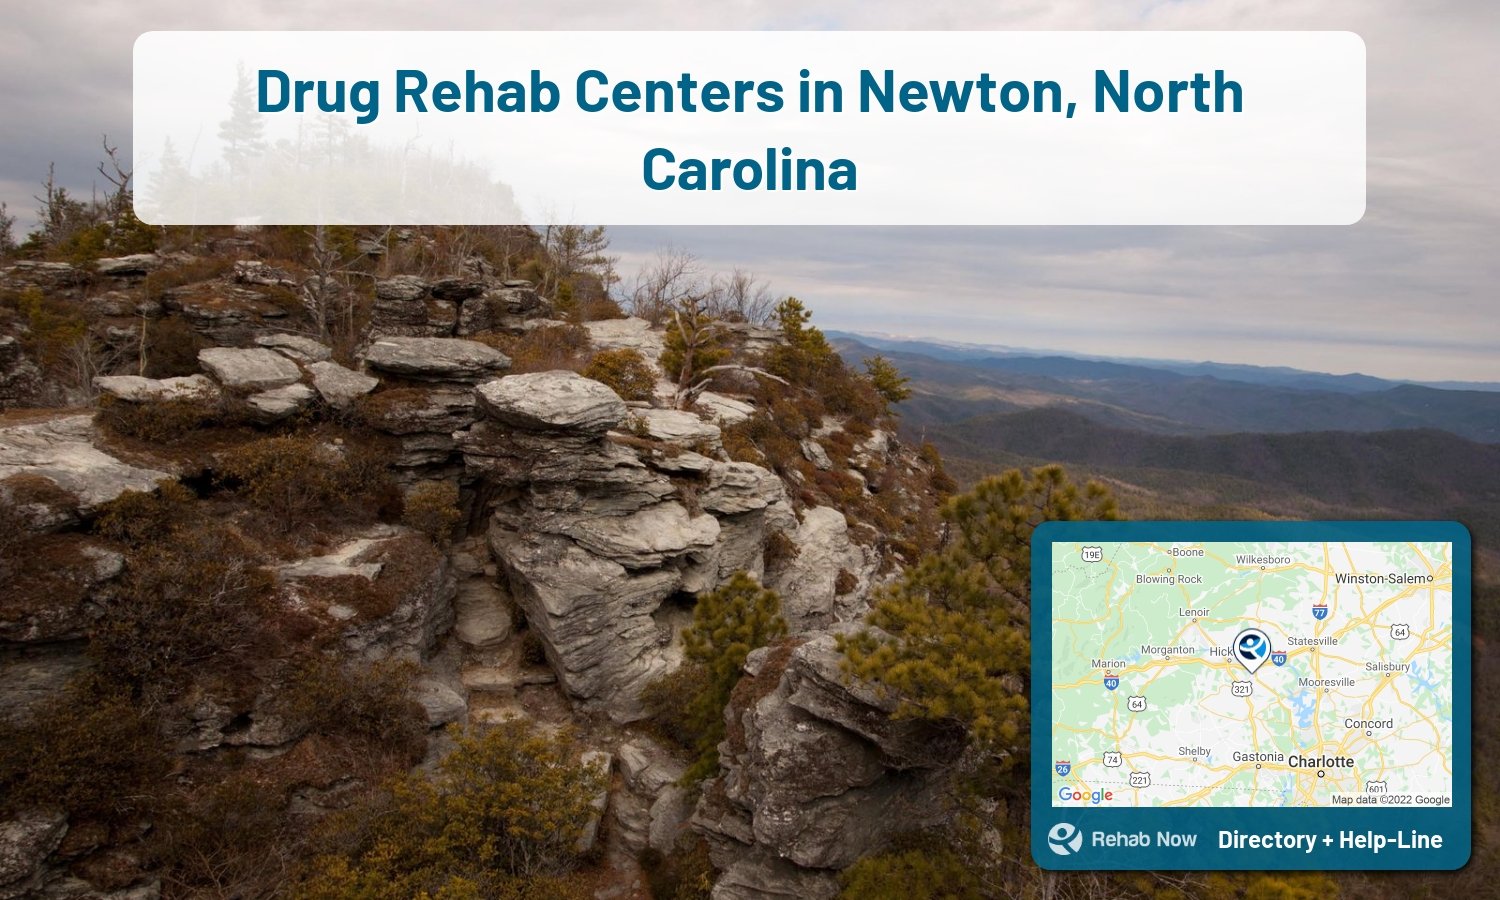 Newton, NC Treatment Centers. Find drug rehab in Newton, North Carolina, or detox and treatment programs. Get the right help now!